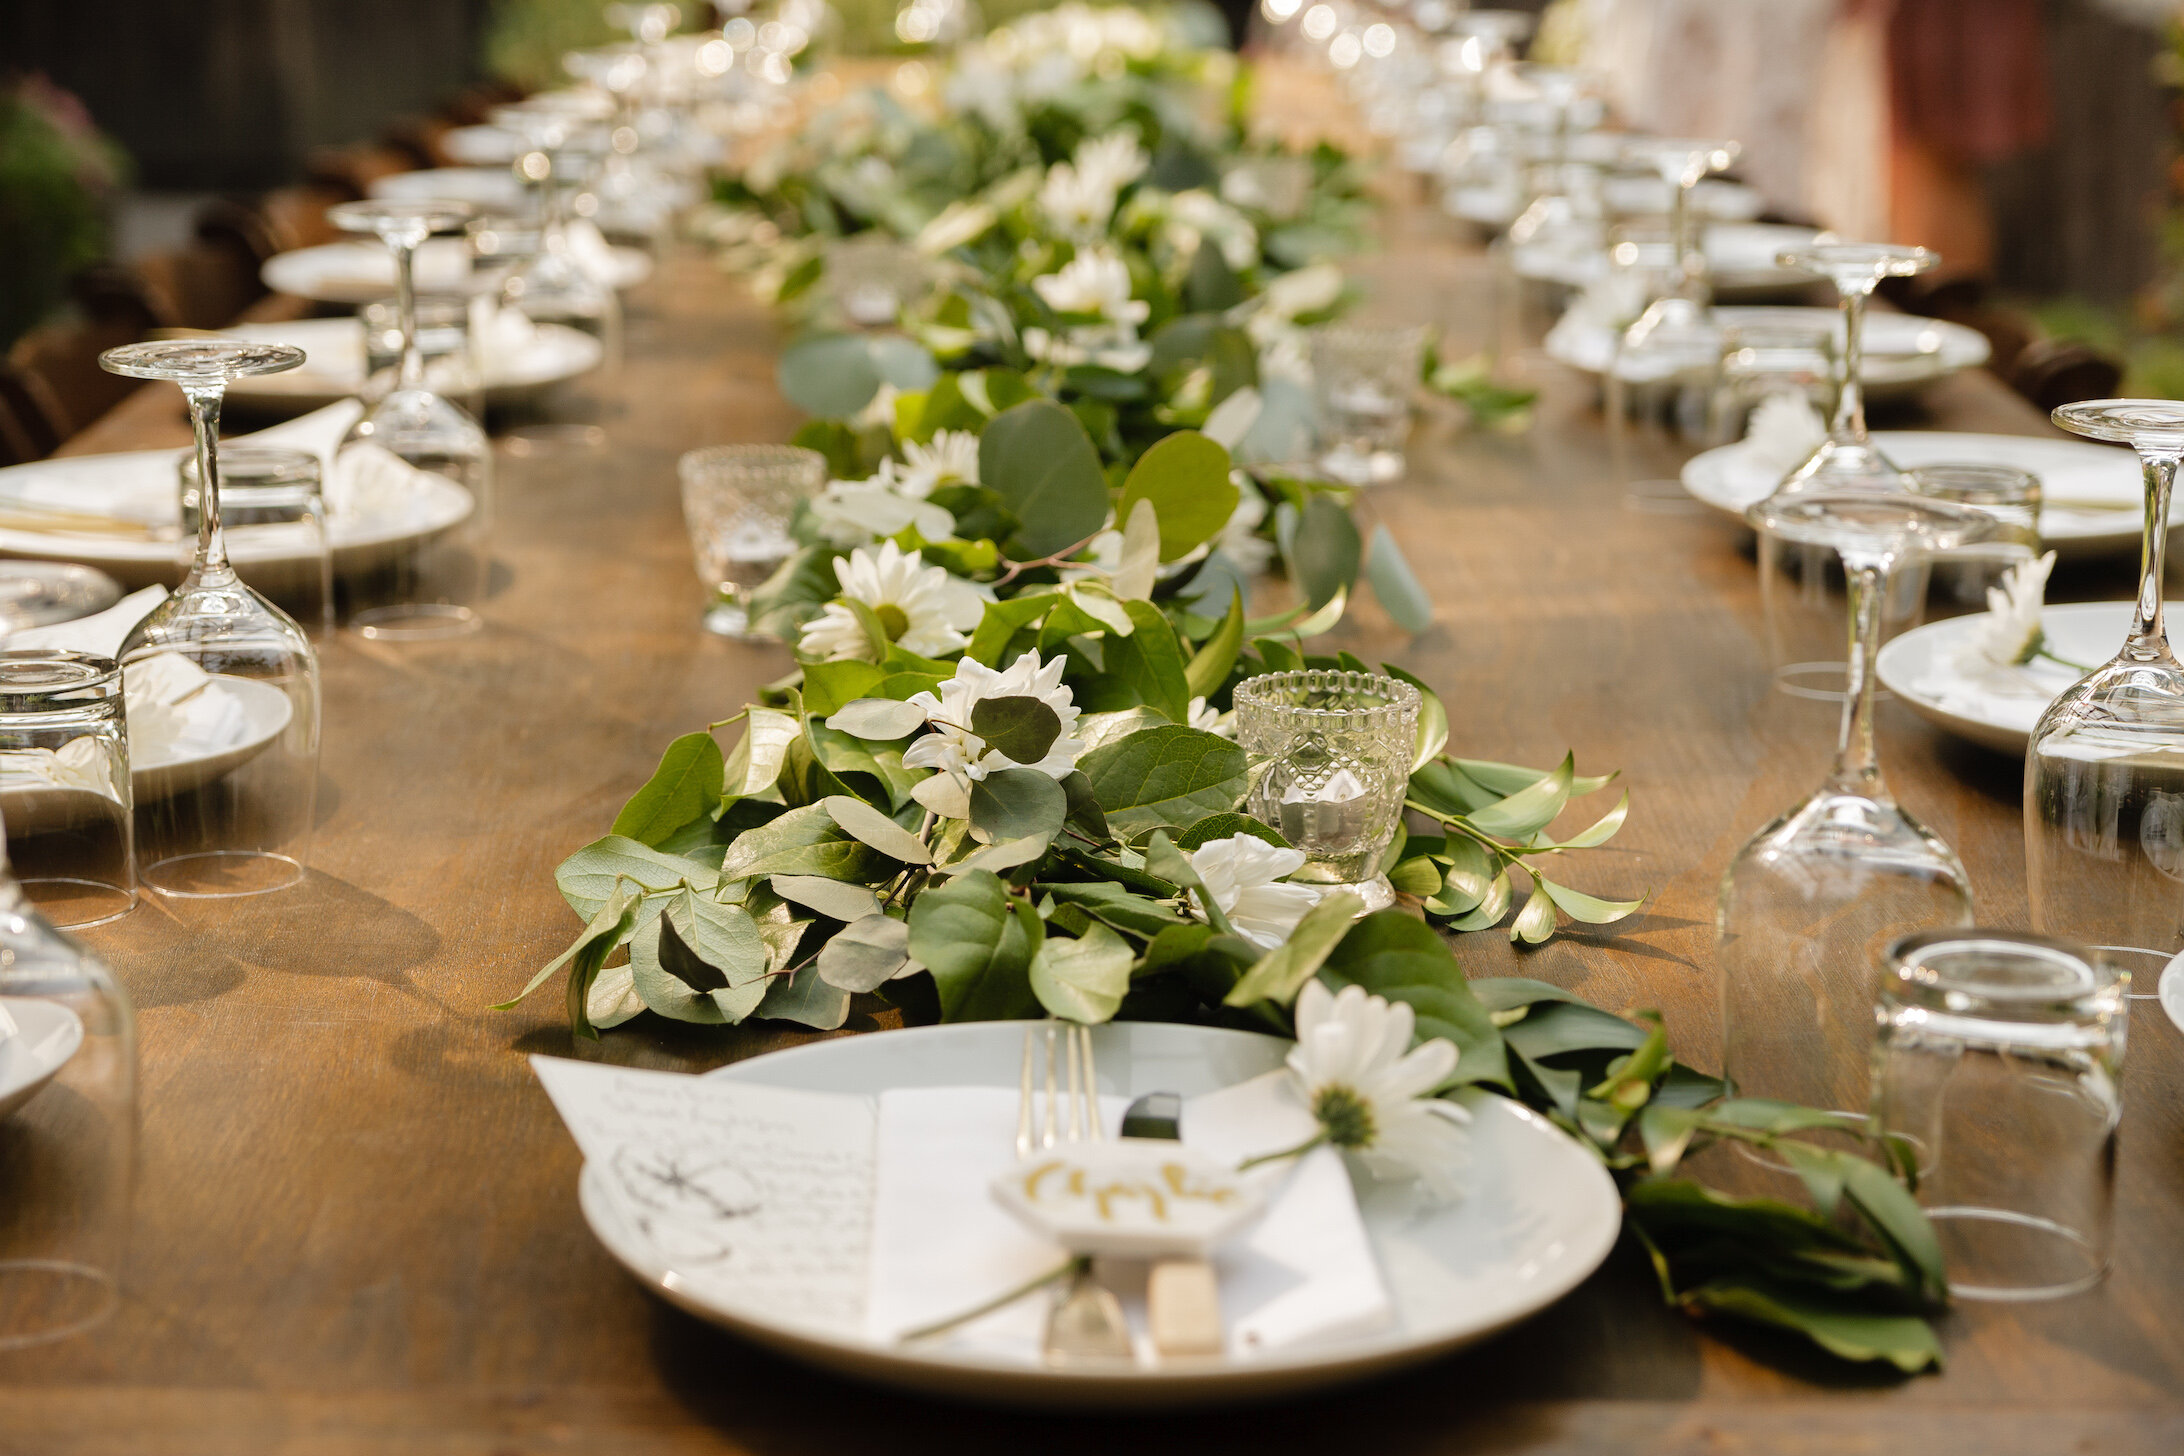 plates and flowers on wedding table.jpg